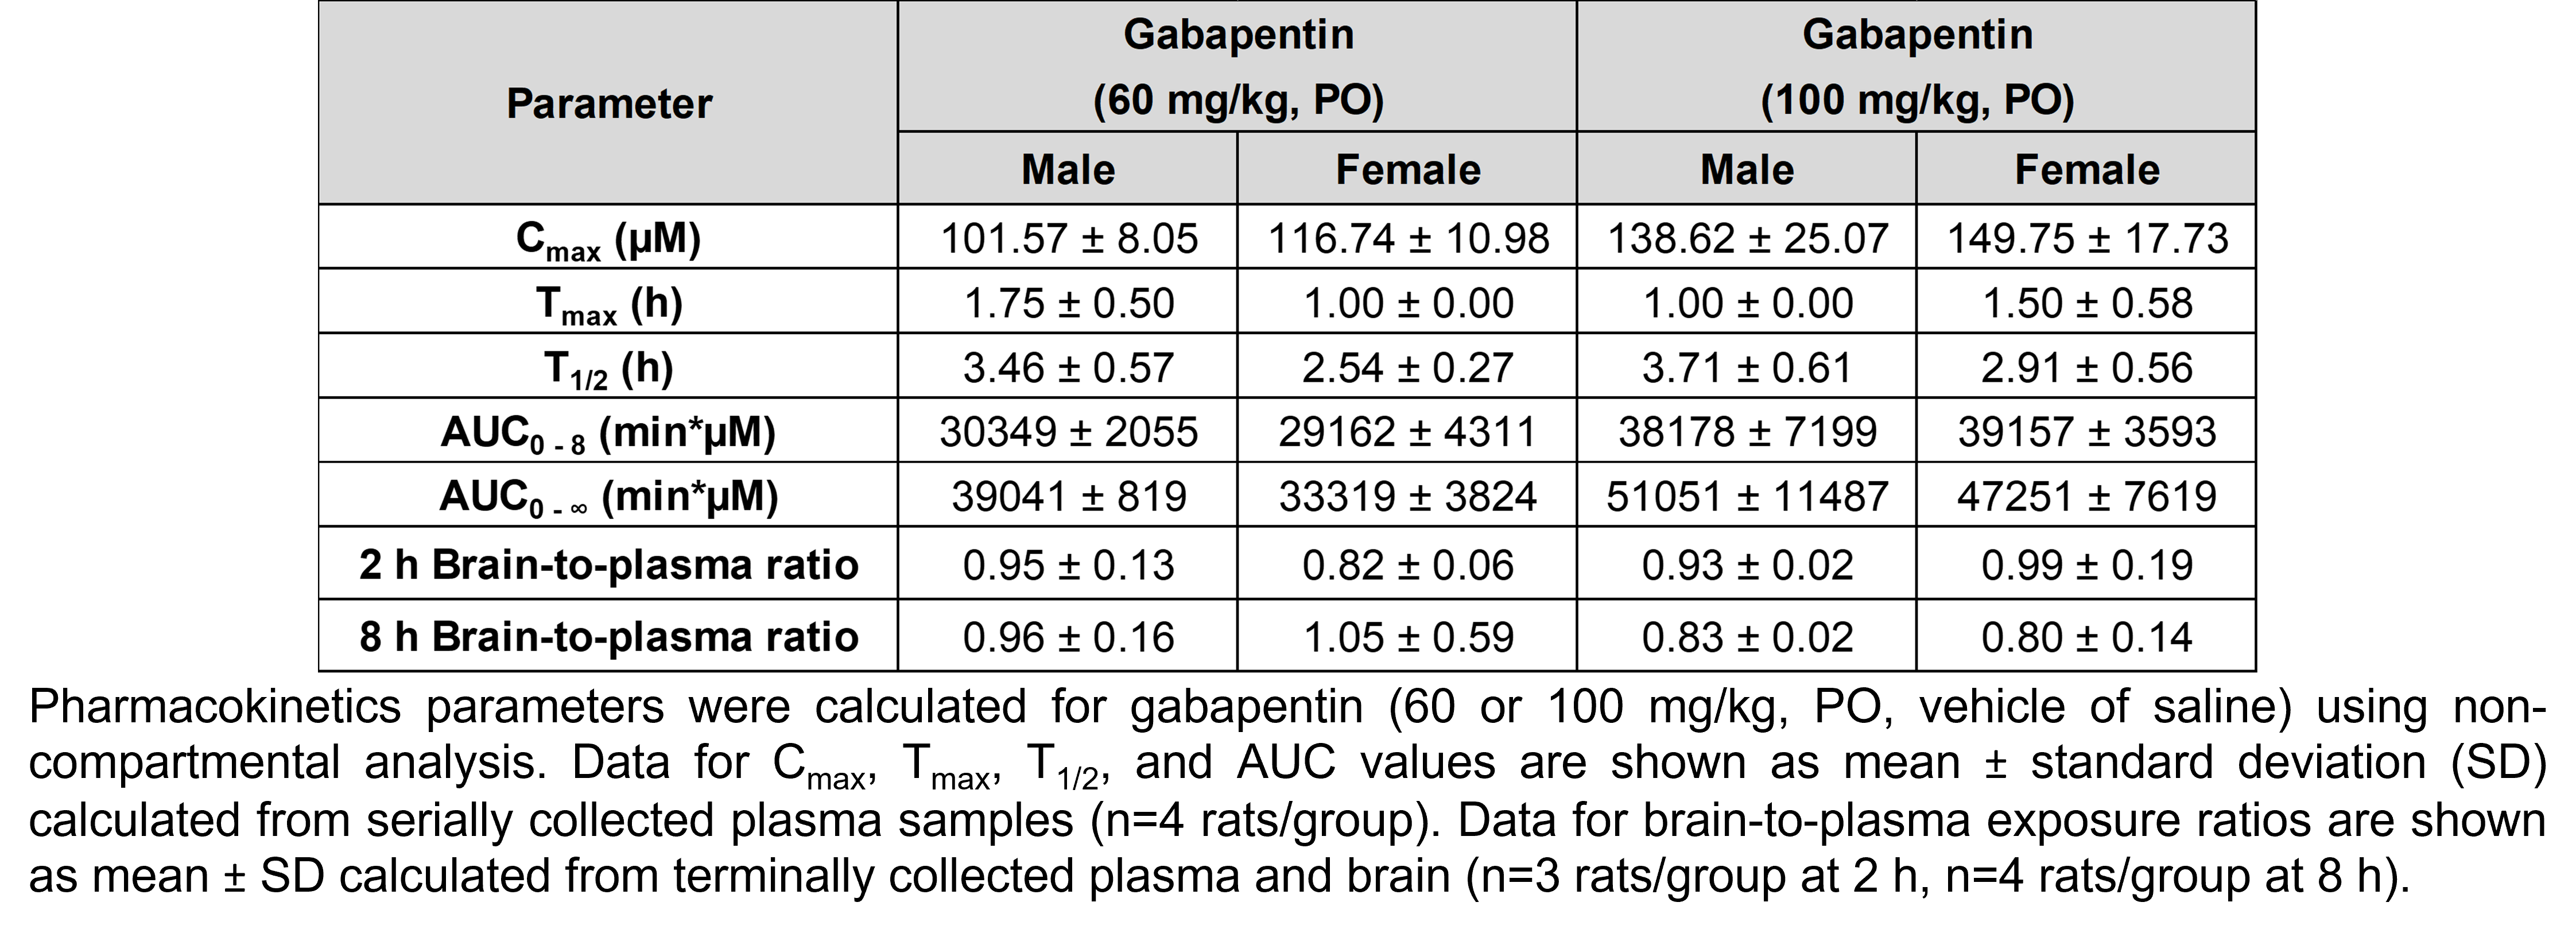 A table shows pharmacokinetics parameters calculated for gabapentin using non-compartmental analysis in male and female rats treated with gabapentin (60 or 100 mg/kg, PO, vehicle of saline). The means for the 4 groups (males and females treated with 60 mg/kg gabapentin and males and females treated with 100 mg/kg gabapentin, respectively) are as follows. The highest concentration (Cmax) was 101.57, 116.74, 138.62, and 149.75 µM; the time at the maximum concentration (Tmax) was 1.75, 1, 1, and 1.5 hours; the half-life (T1/2) was 3.46, 2.54, 3.71, and 2.91 hours; area under the curve for time 0 to 8 hours was 30349, 29162, 38178, and 39157 minutes*µM; area under the curve for time 0 to infinity was 39041, 33319, 51051, and 47251 minutes*µM; the brain-to-plasma ratio at 2 hours was 0.95, 0.82, 0.93, and 0.99; the brain-to-plasma ratio at 8 hours was 0.96, 1.05, 0.83, and 0.8